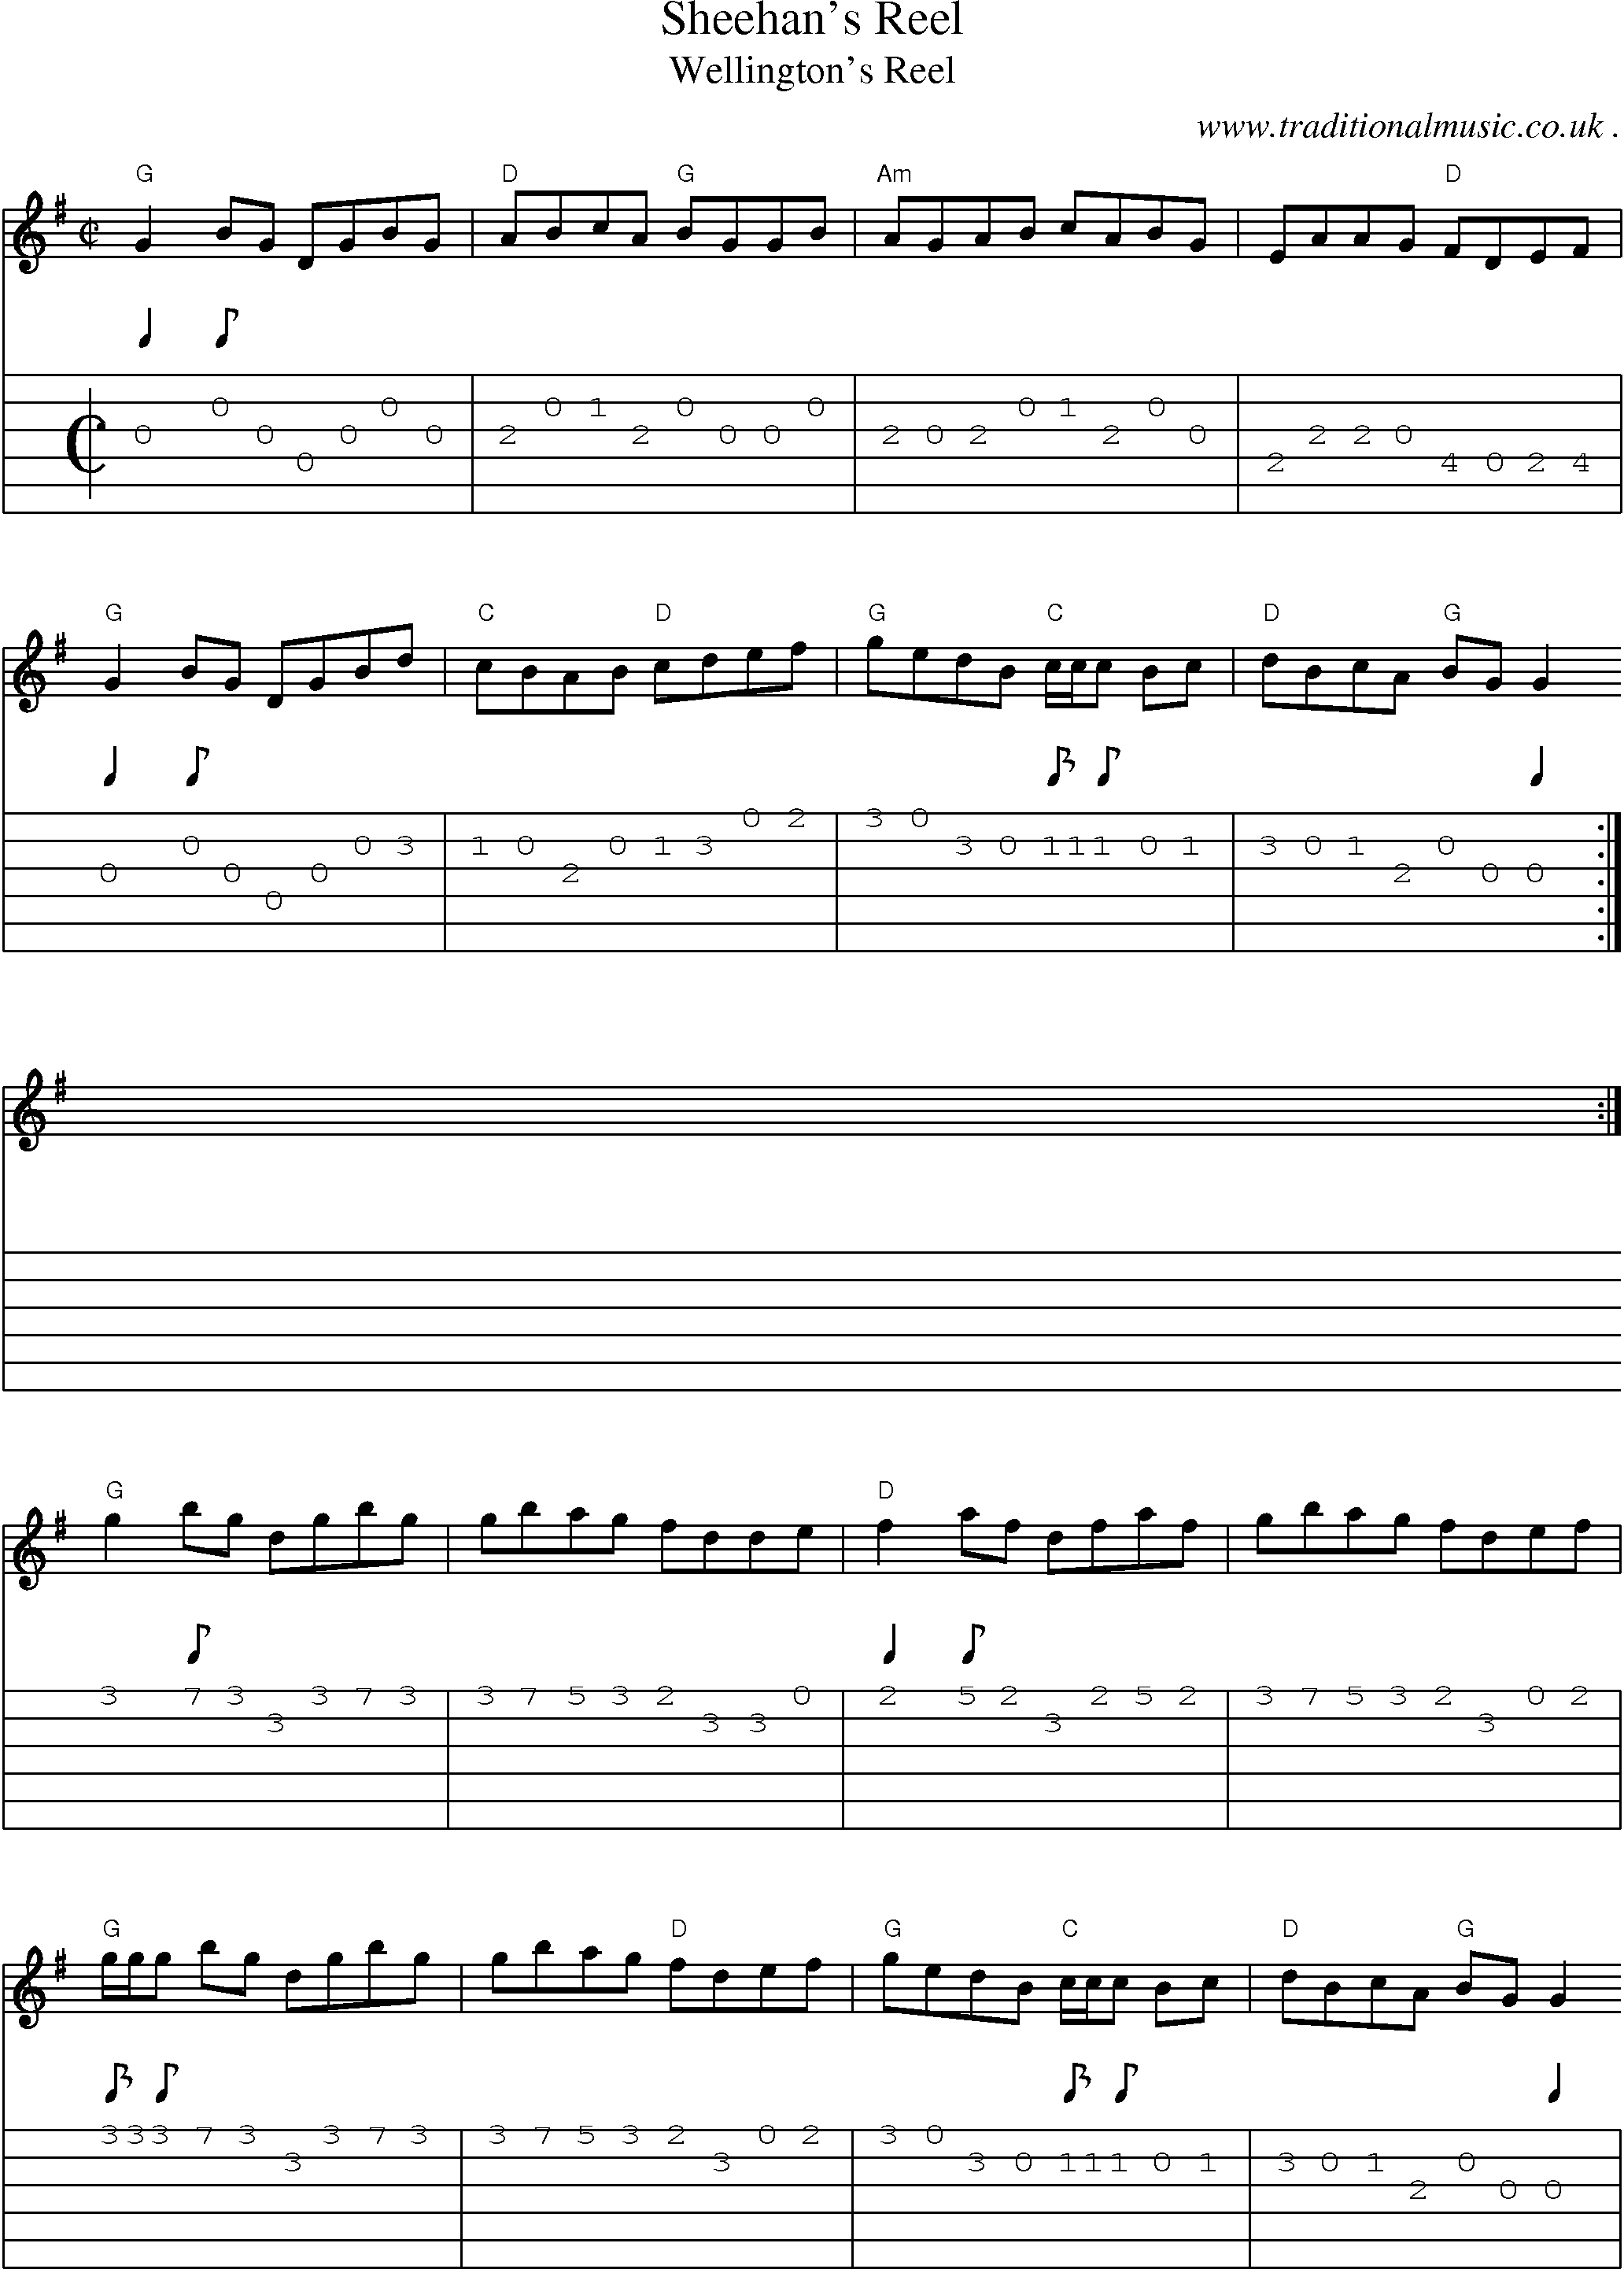 Music Score and Guitar Tabs for Sheehans Reel